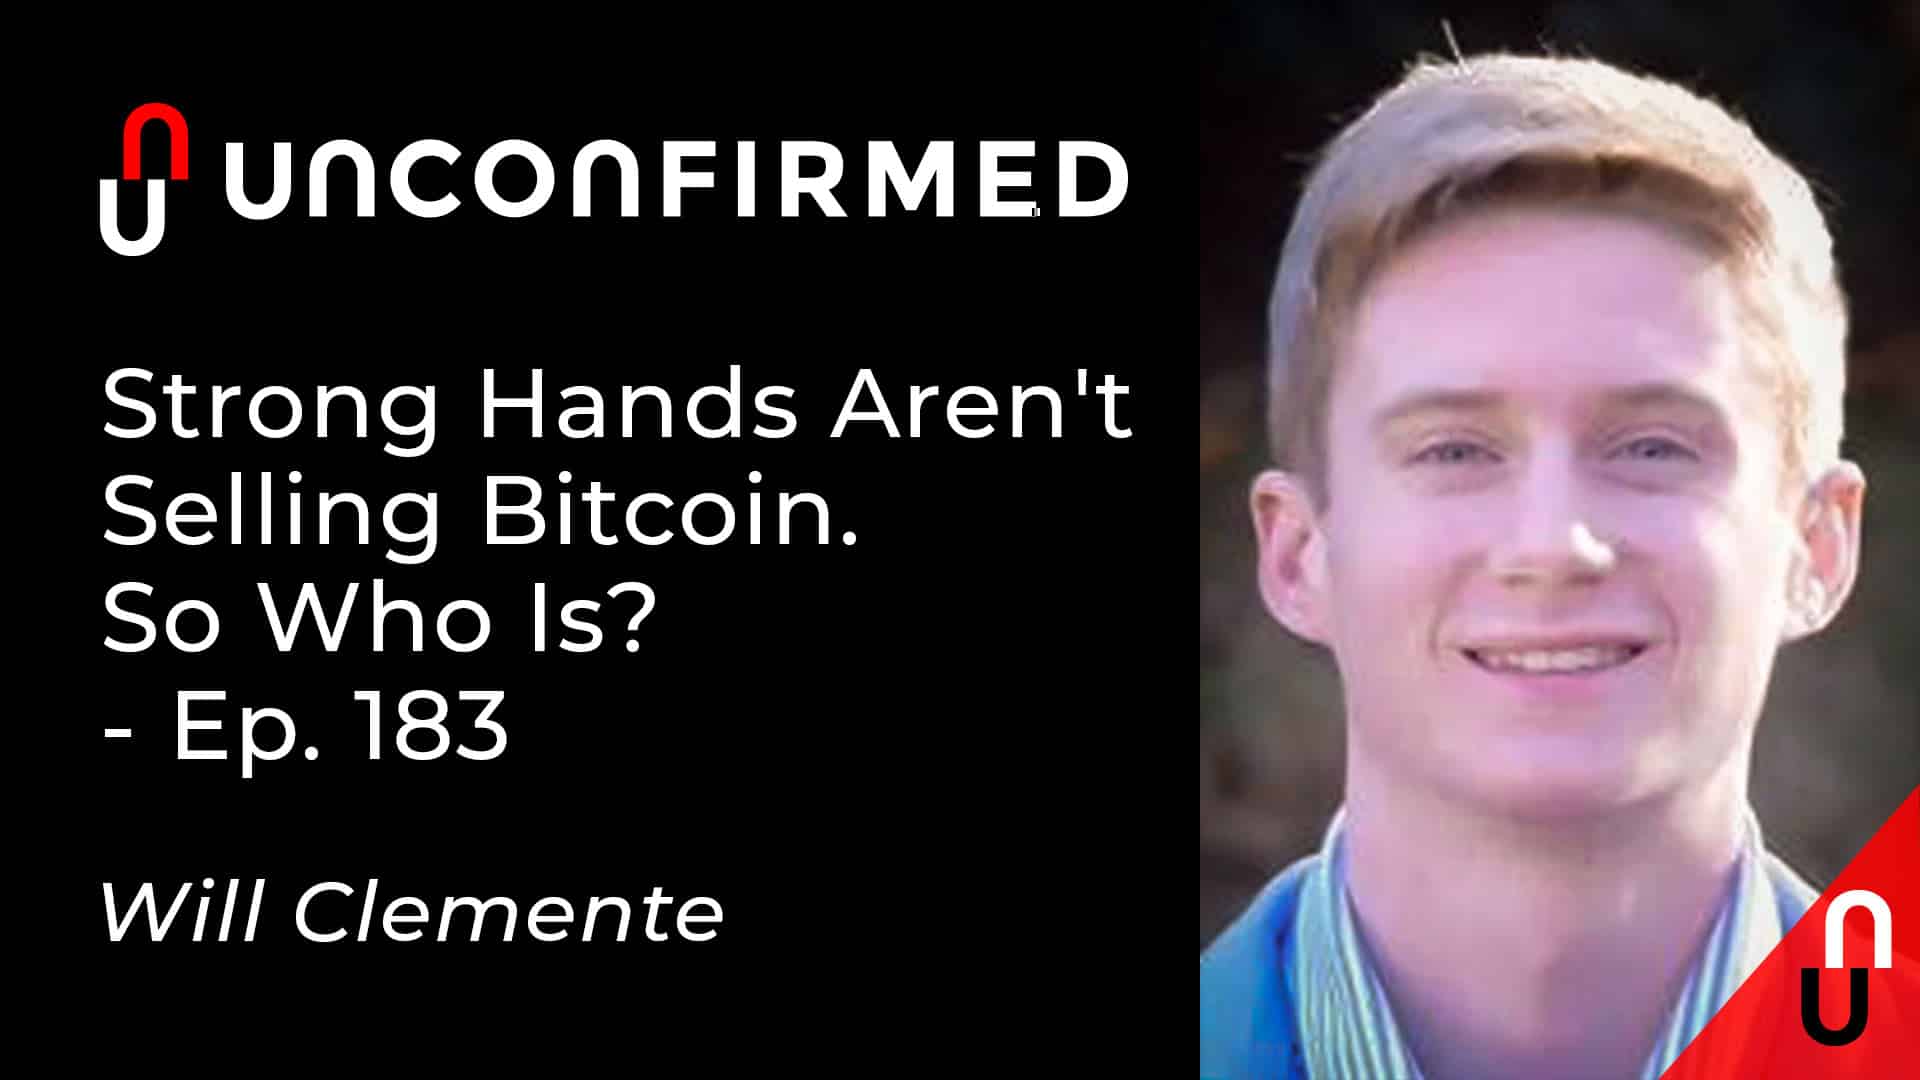 Unconfirmed - Ep.183 - Strong Hands Aren't Selling Bitcoin - So Who Is